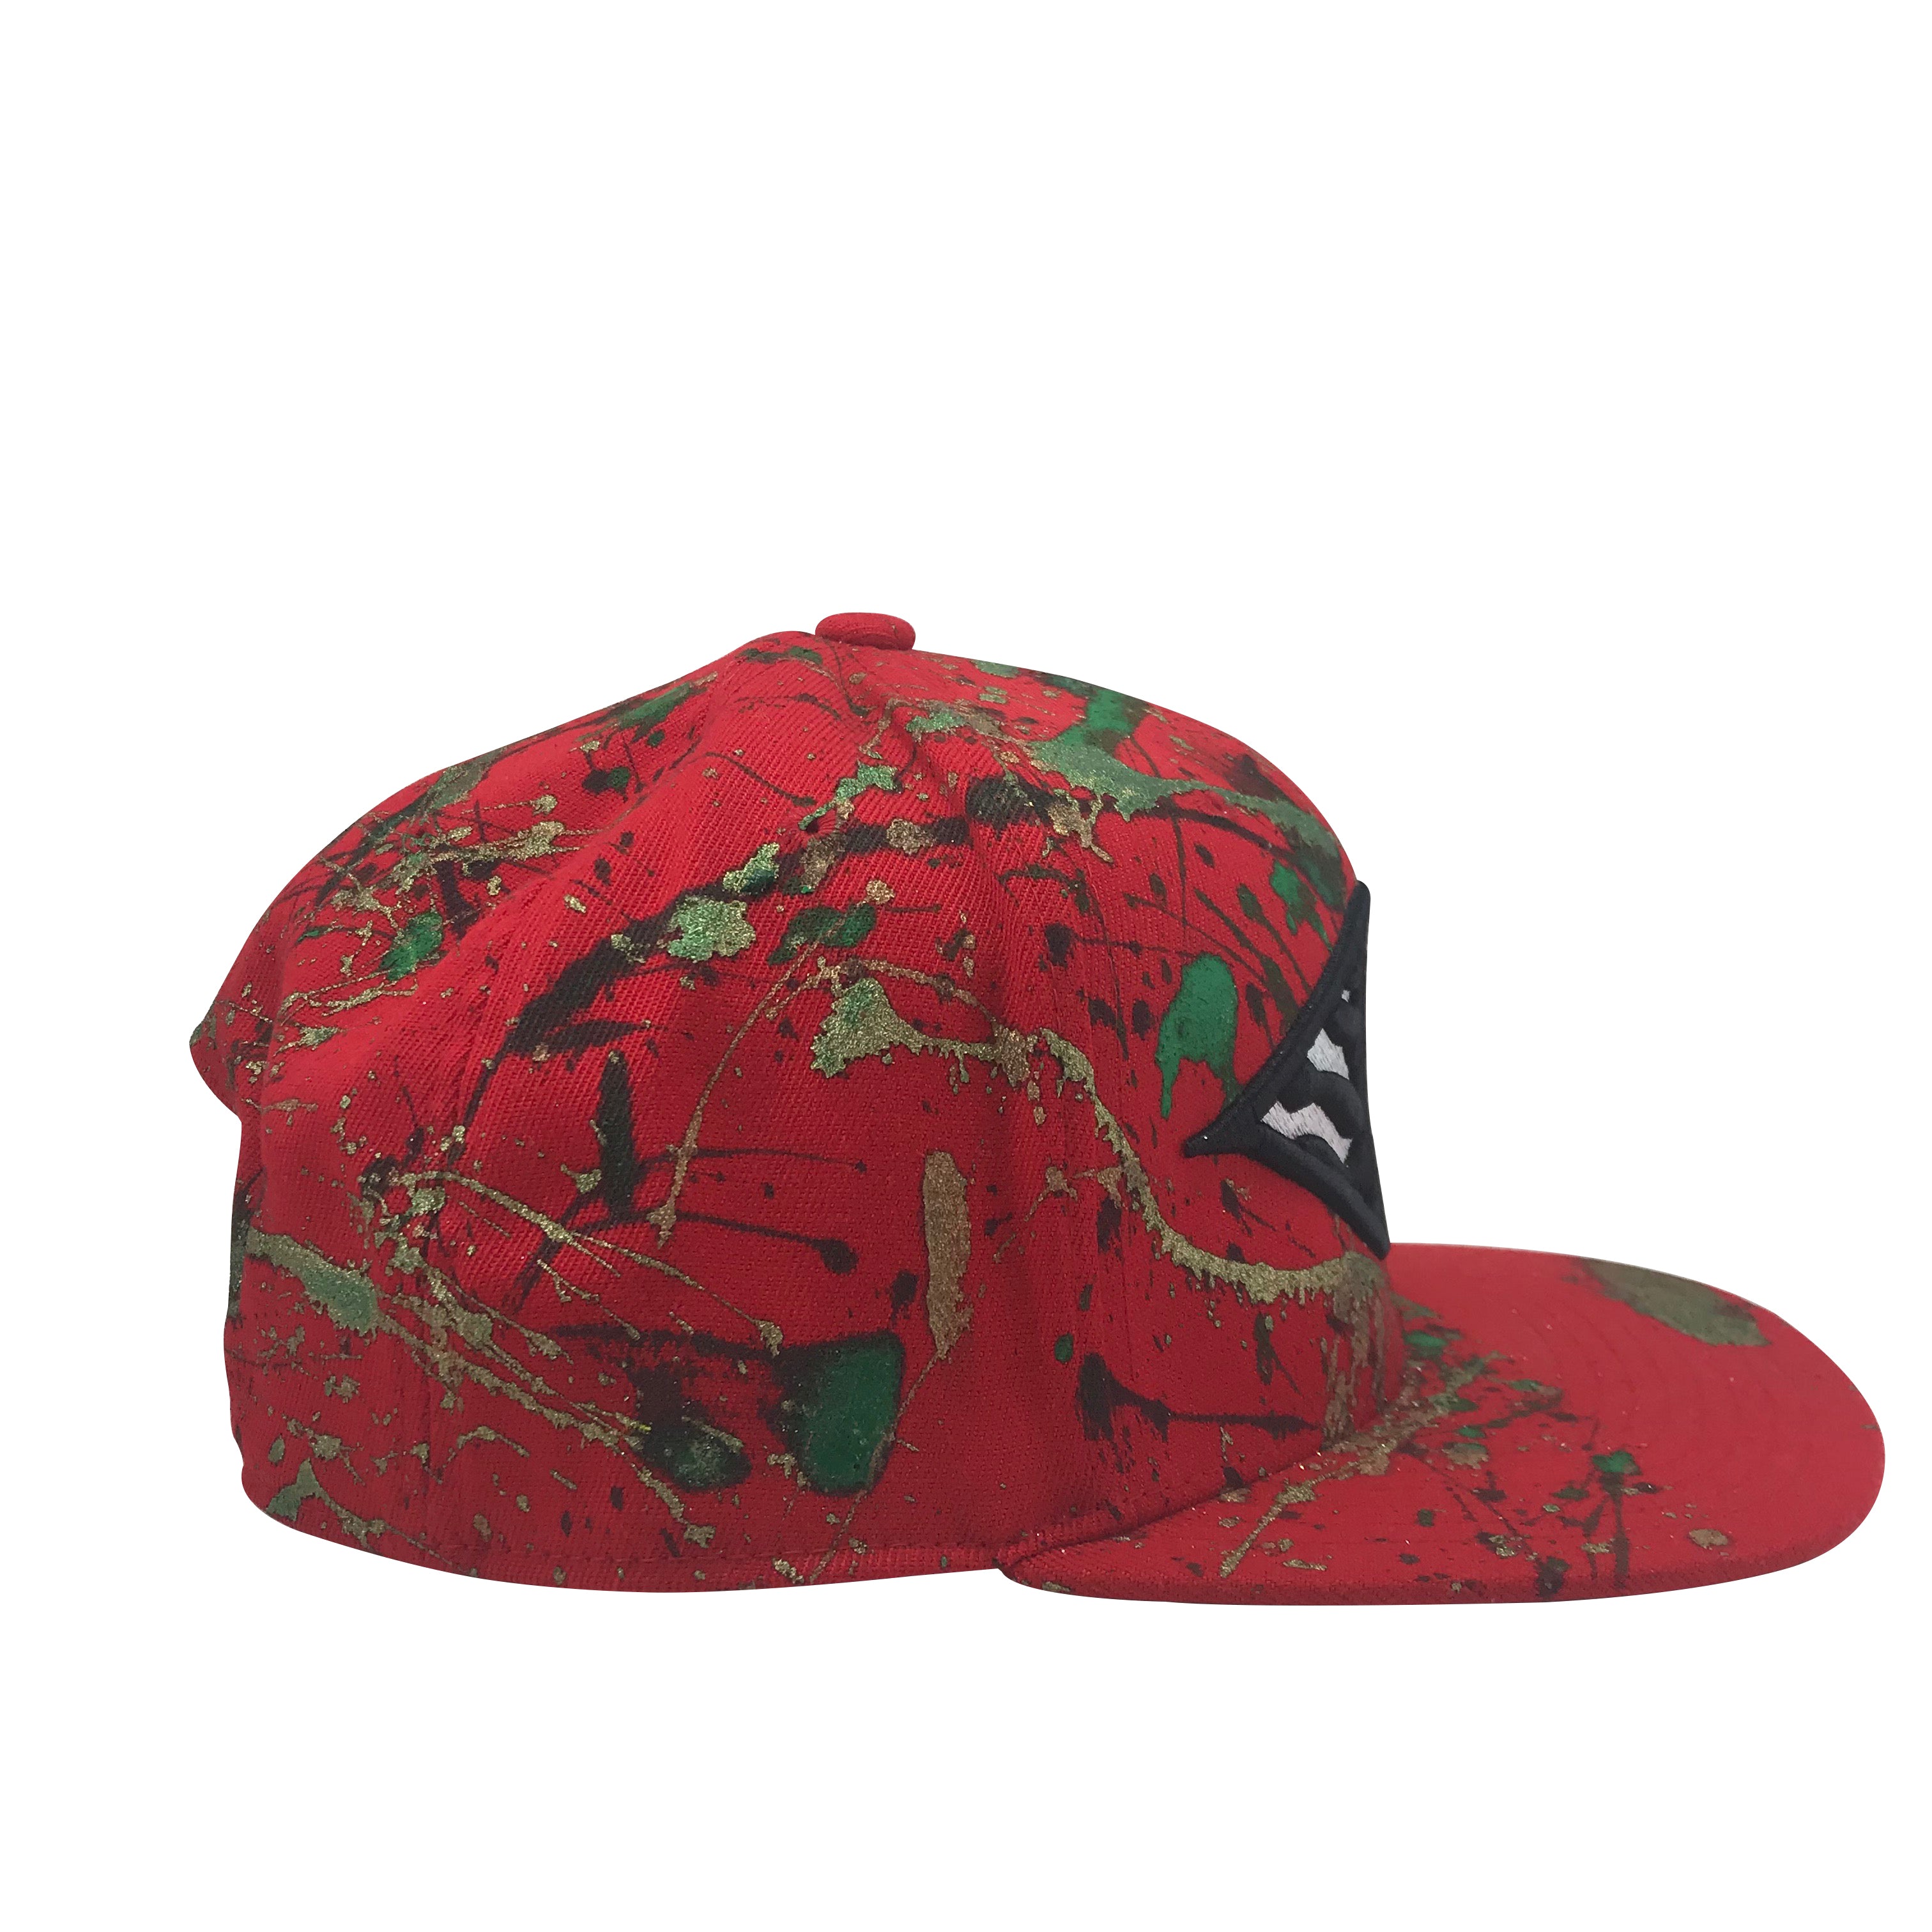 Hat - Unique hand painted / Red- green